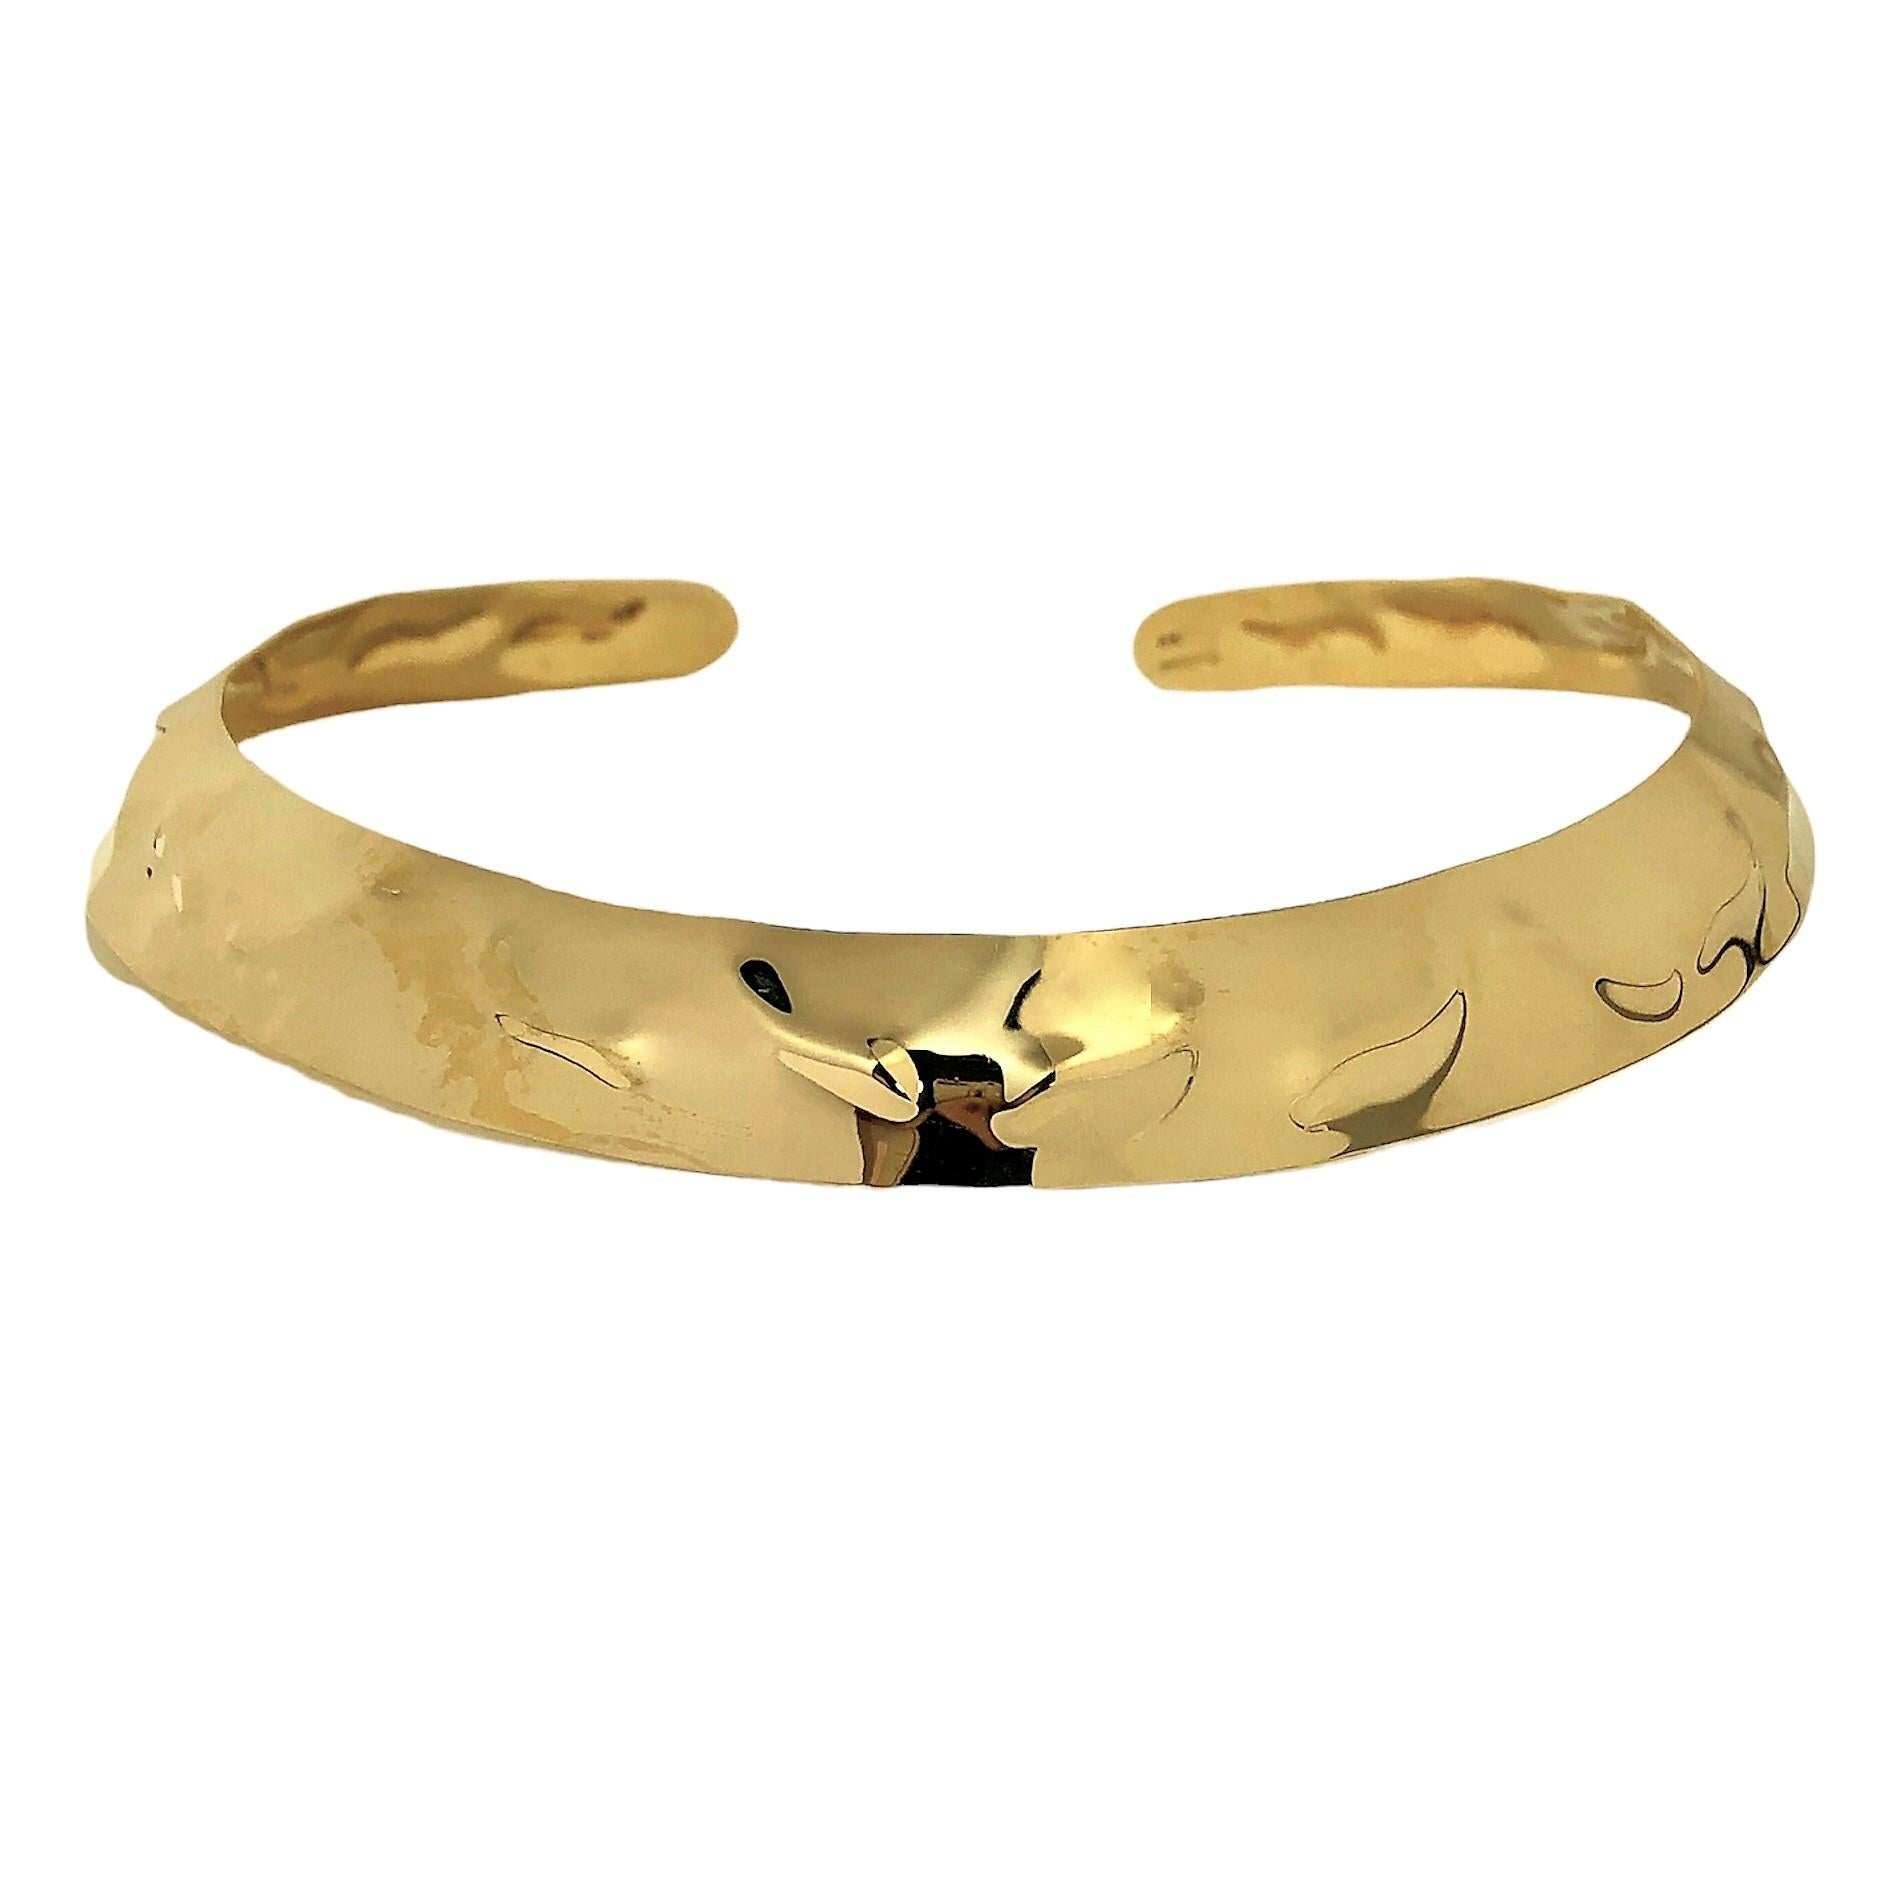 This striking Mid-20th Century Cartier 18k yellow gold choker is chased with repeating modernist motifs over it's entire surface.  Measures 5/8 inch in width at the front and tapers down to 7/16 inch at the rear. Markings are Cartier in script and